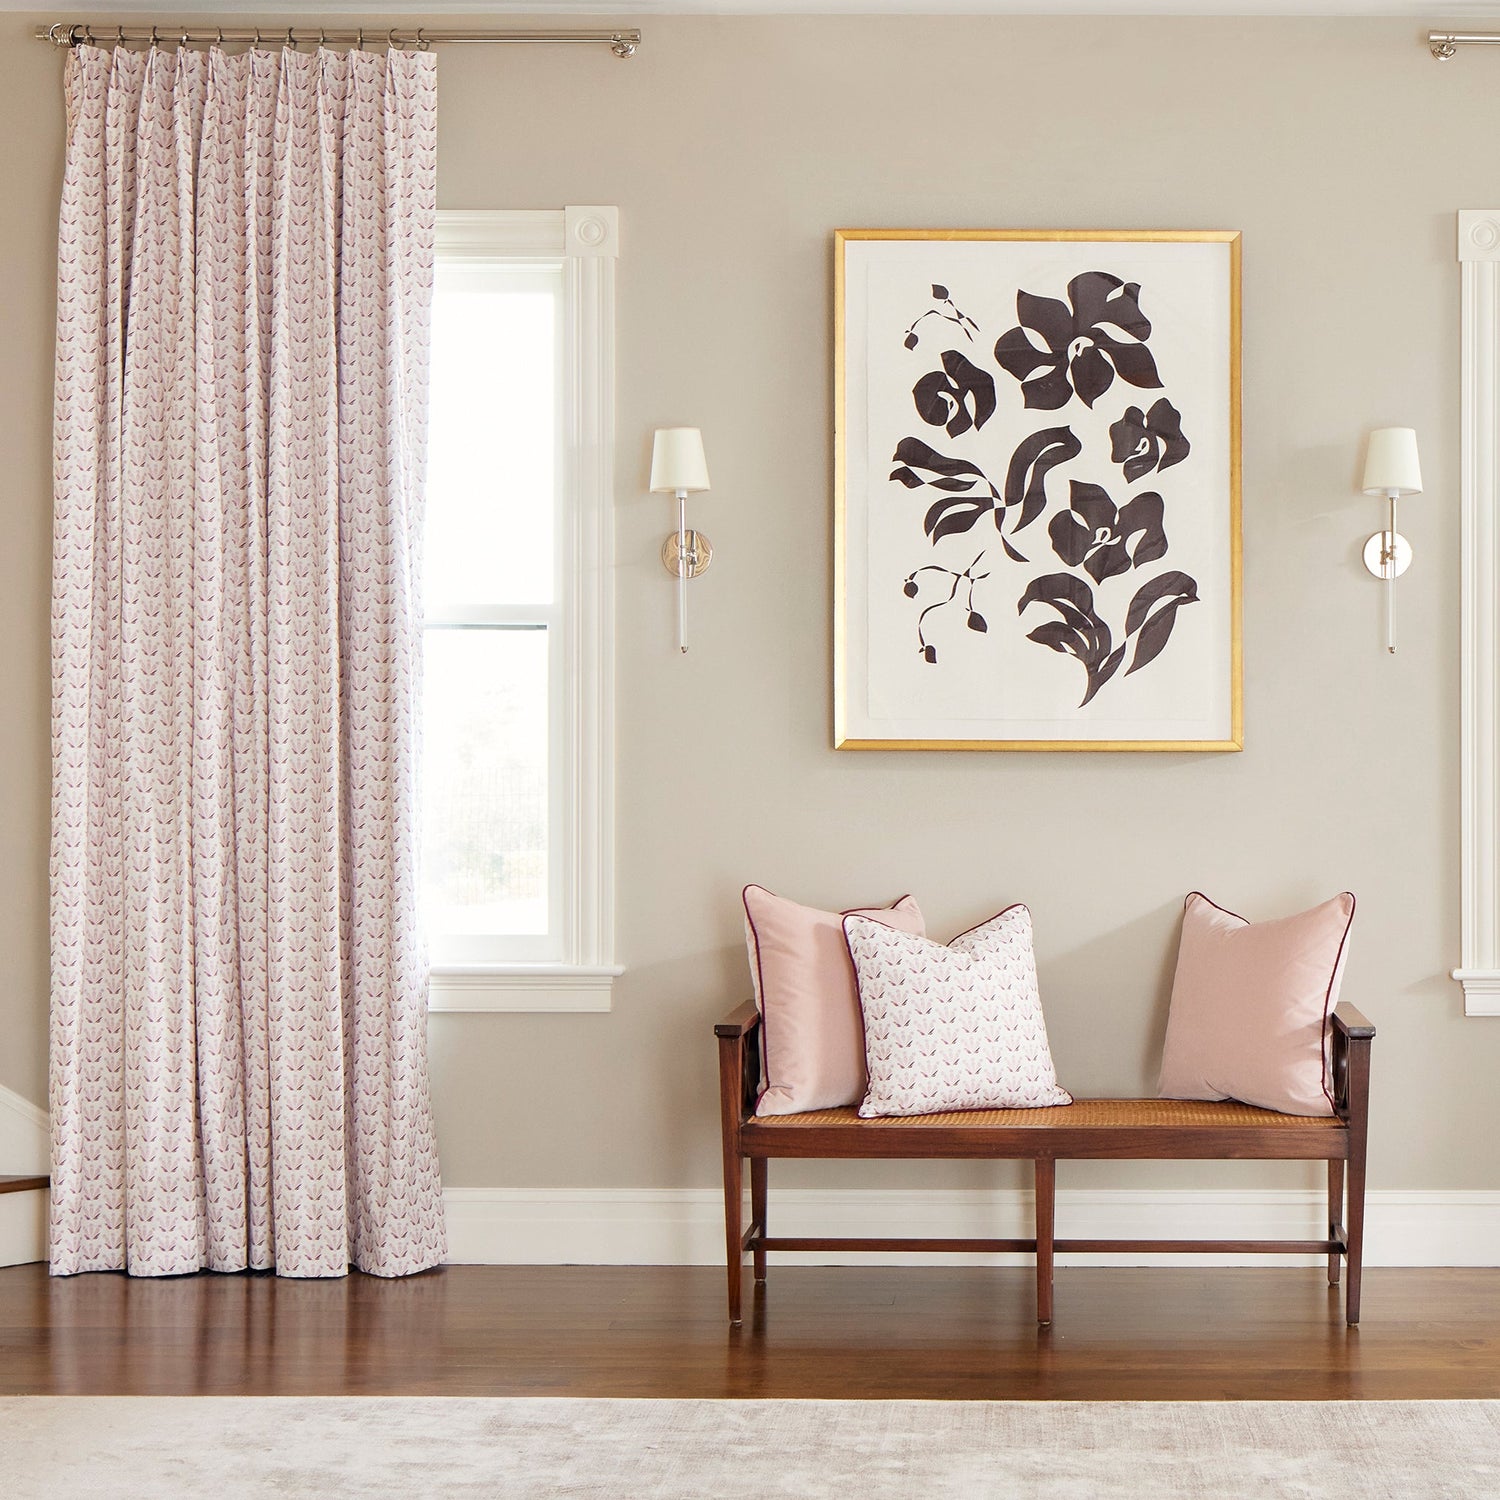 Room corner styled with Pink & Burgundy Drop Repeat Floral Printed Curtains next to bench with two Pink Velvet Pillows and one Pink & Burgundy Drop Repeat Floral Printed Pillow below a floral artwork